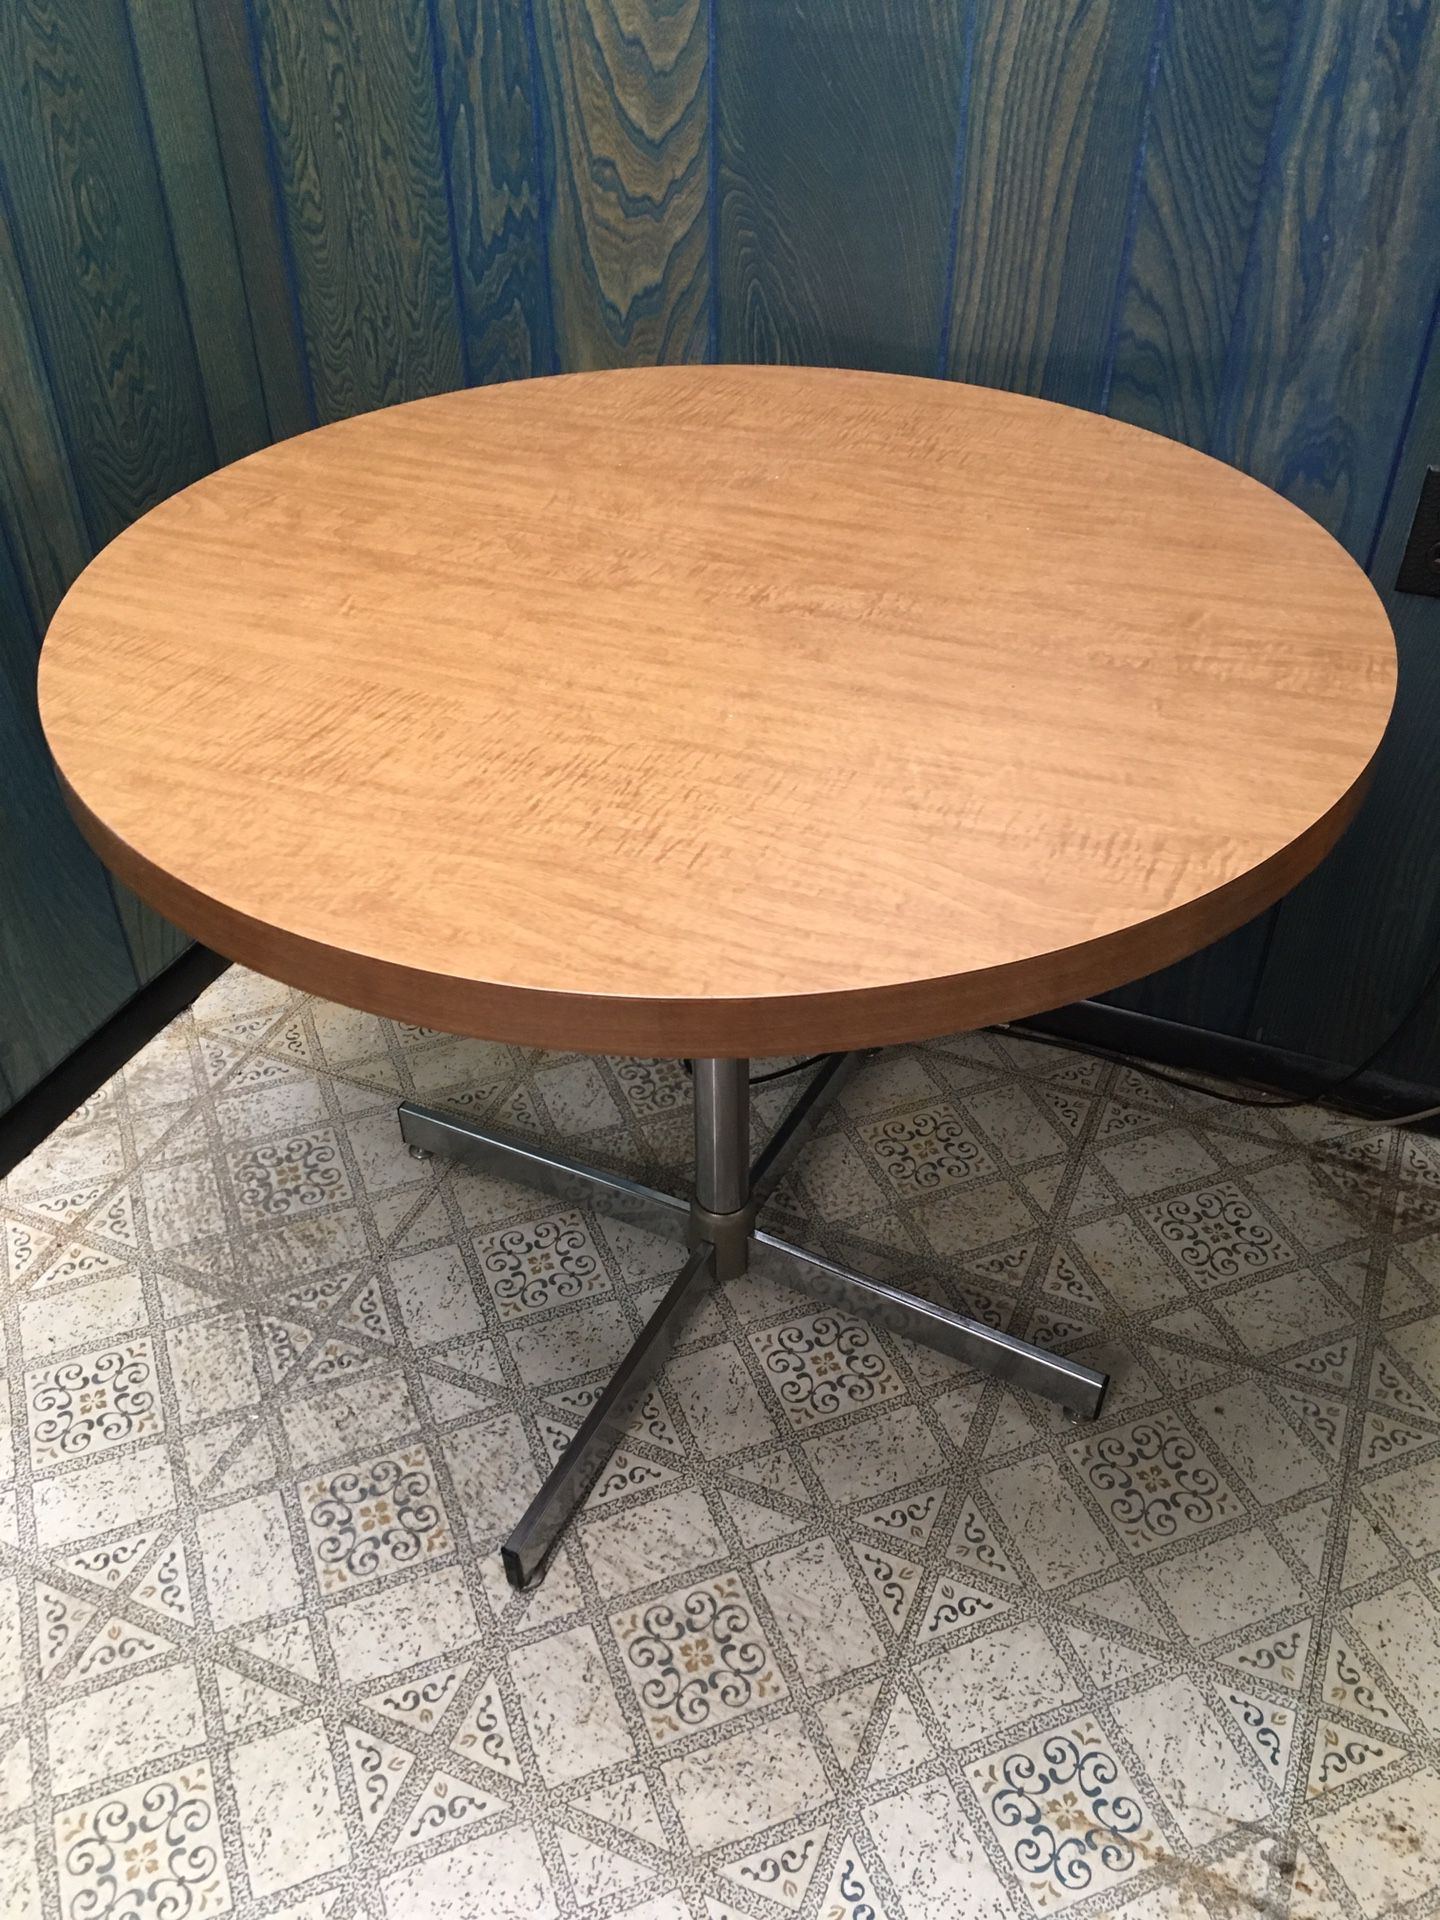 Small Round Formica Table